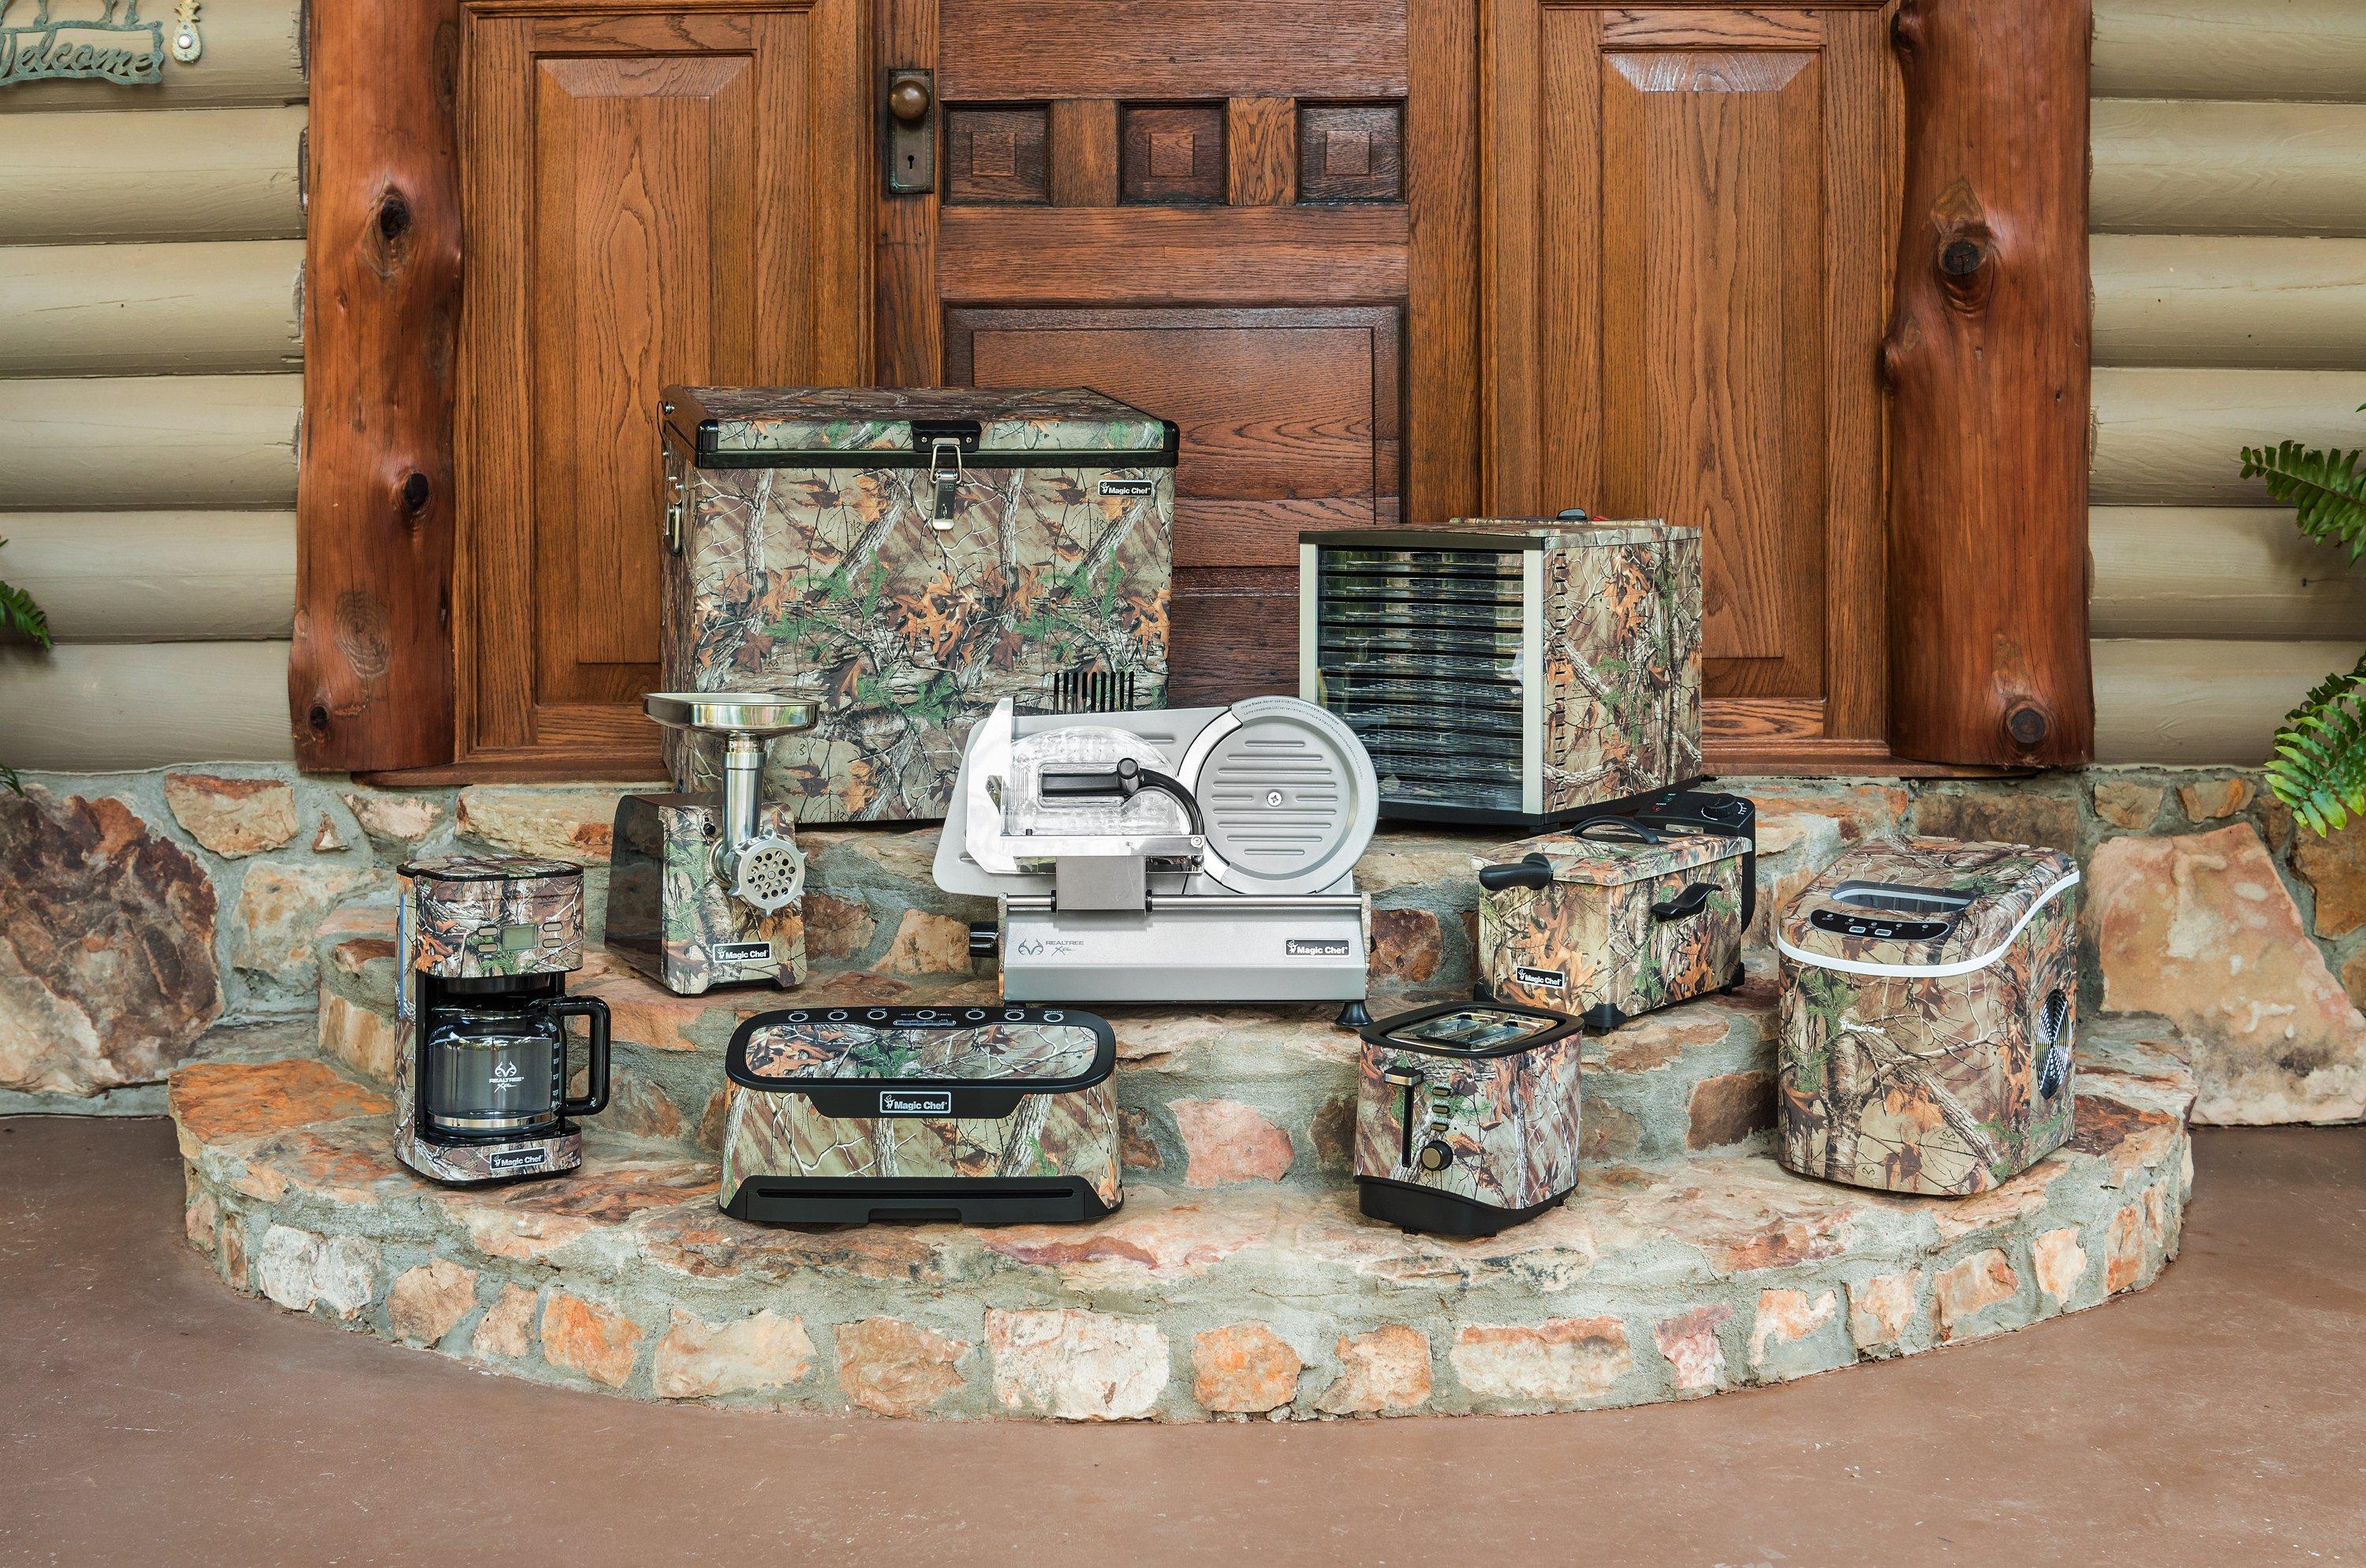 The Magic Chef Realtree line has everything you need for camp or kitchen.